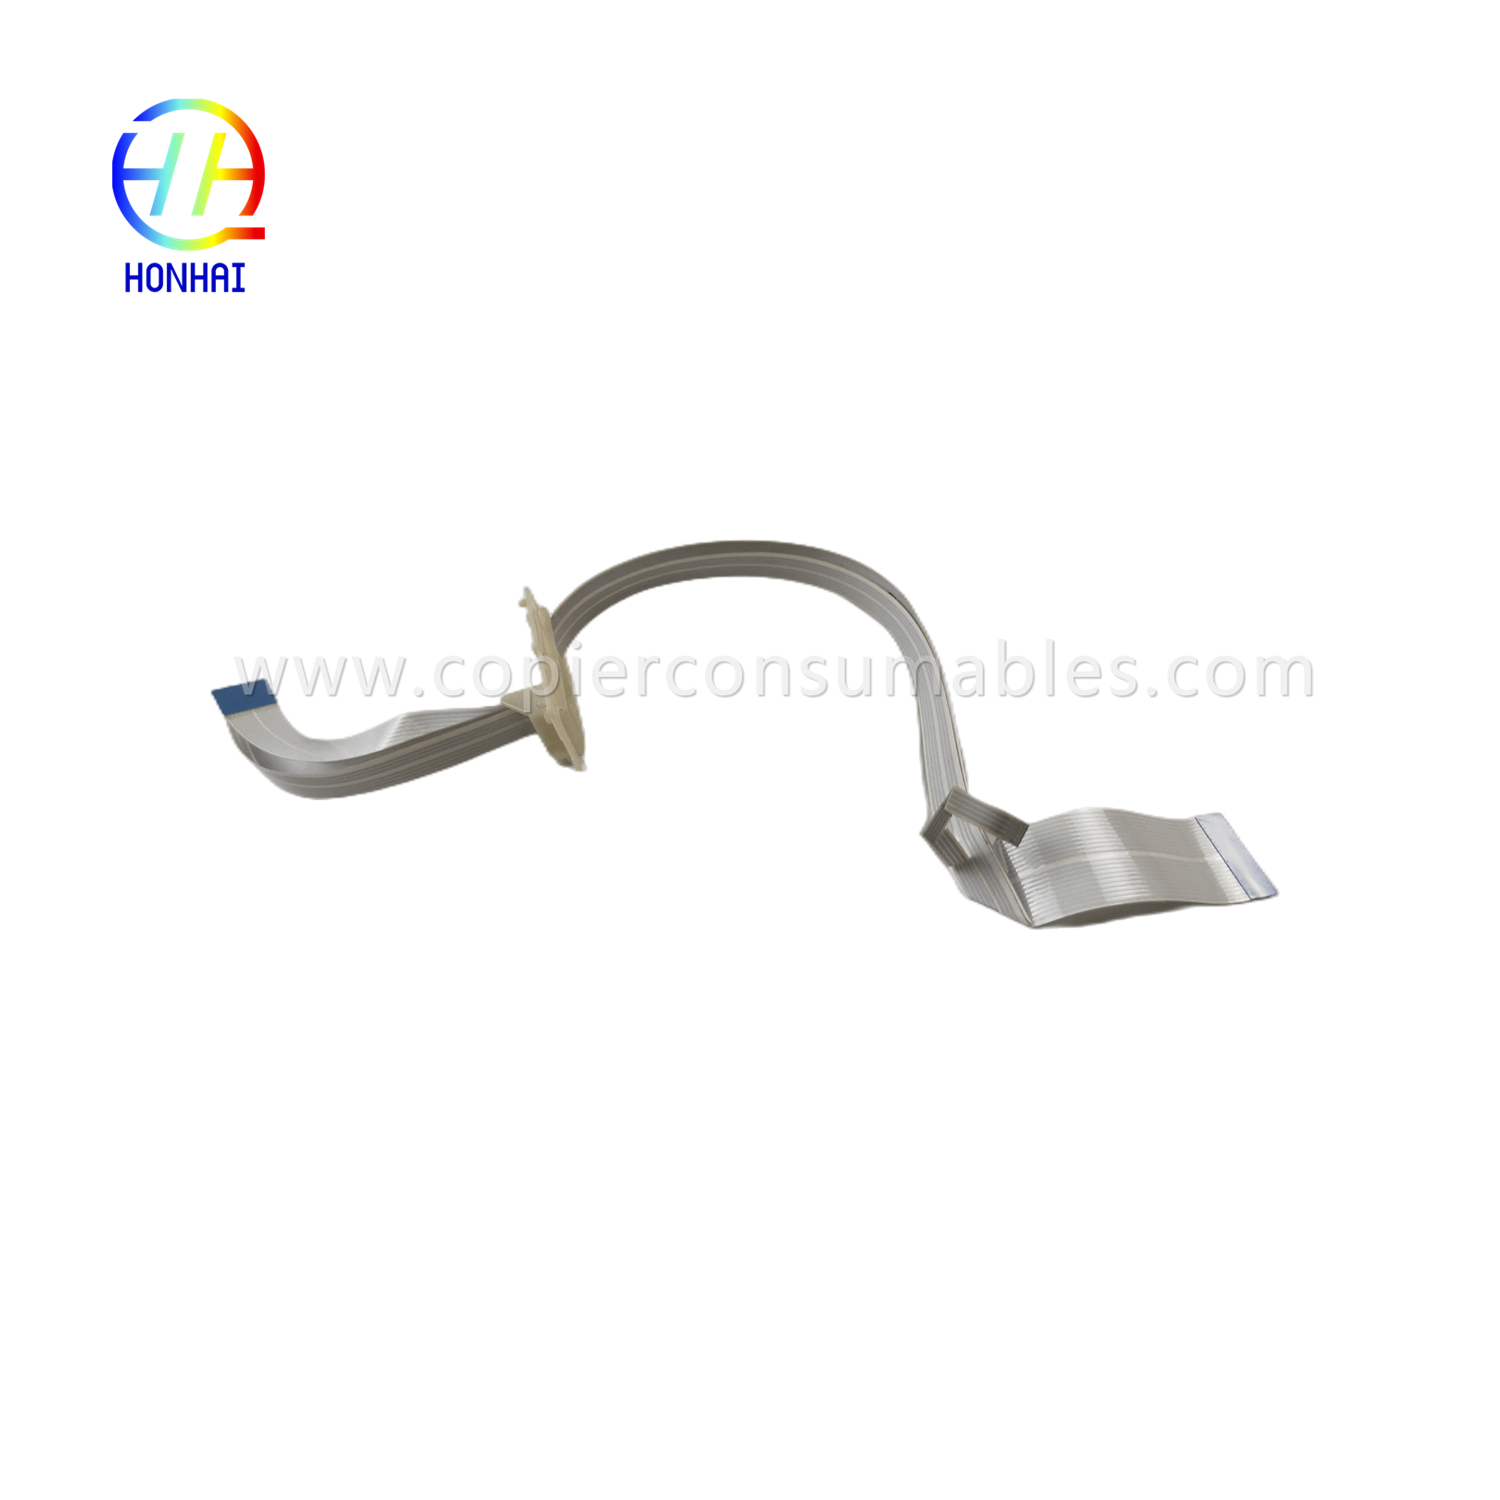 https://c585.goodao.net/head-cable-for-epson-l382-l210-l355-inkjet-printer-parts-product/